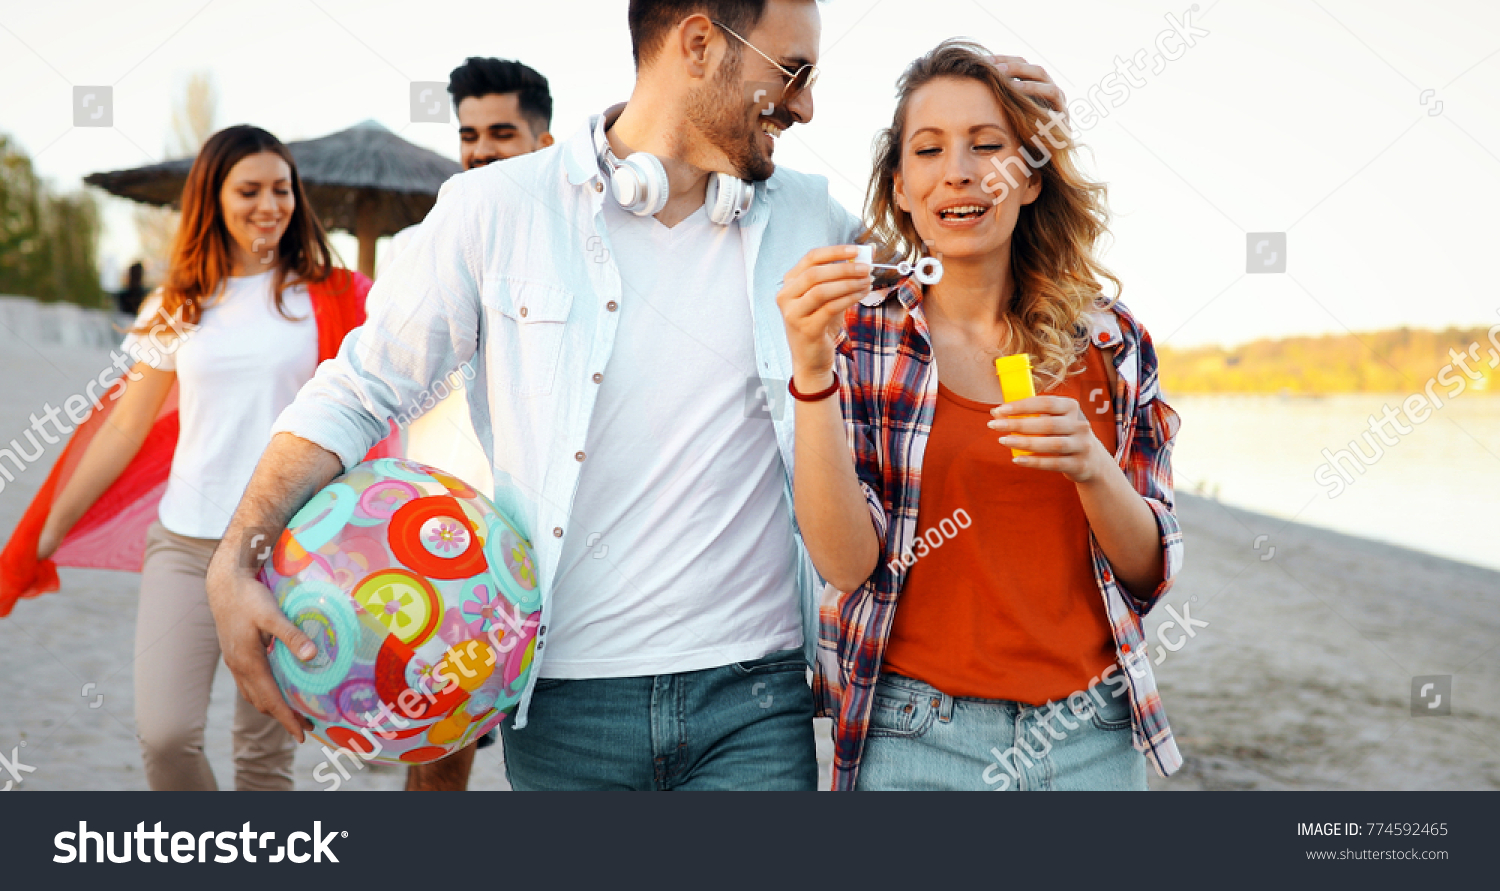 Beach party with friends. Cheerful young people spending nice time together on the beach #774592465